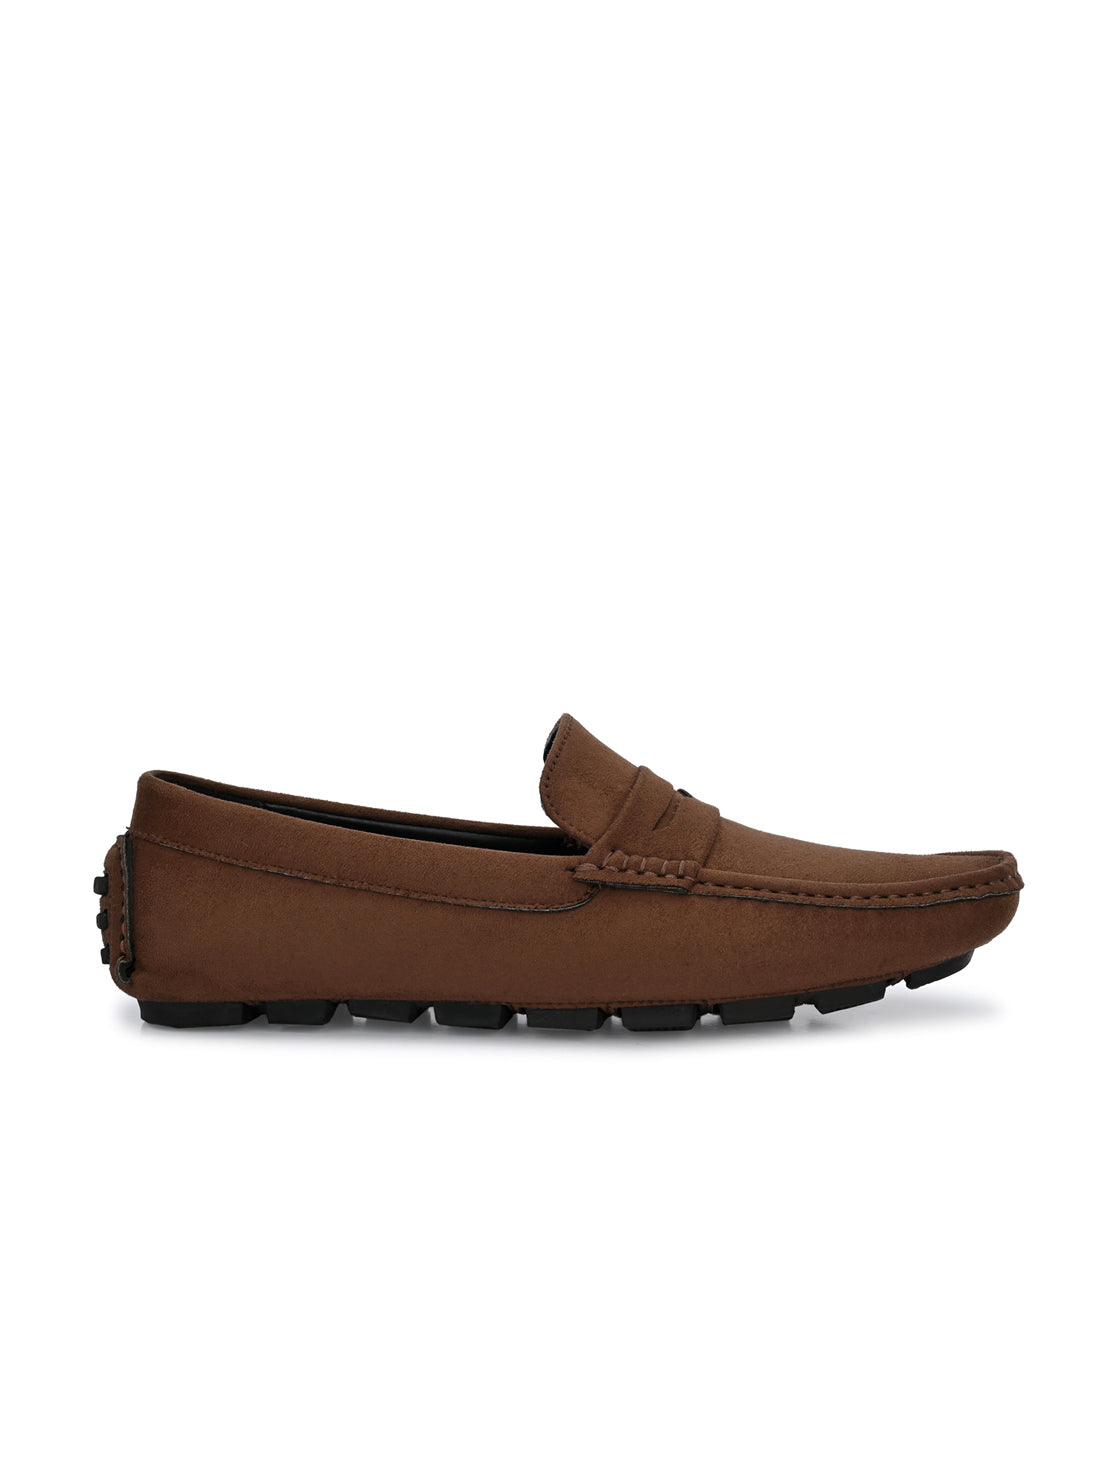 Guava Men's Brown Casual Slip On Driving Loafers (GV15JA752)